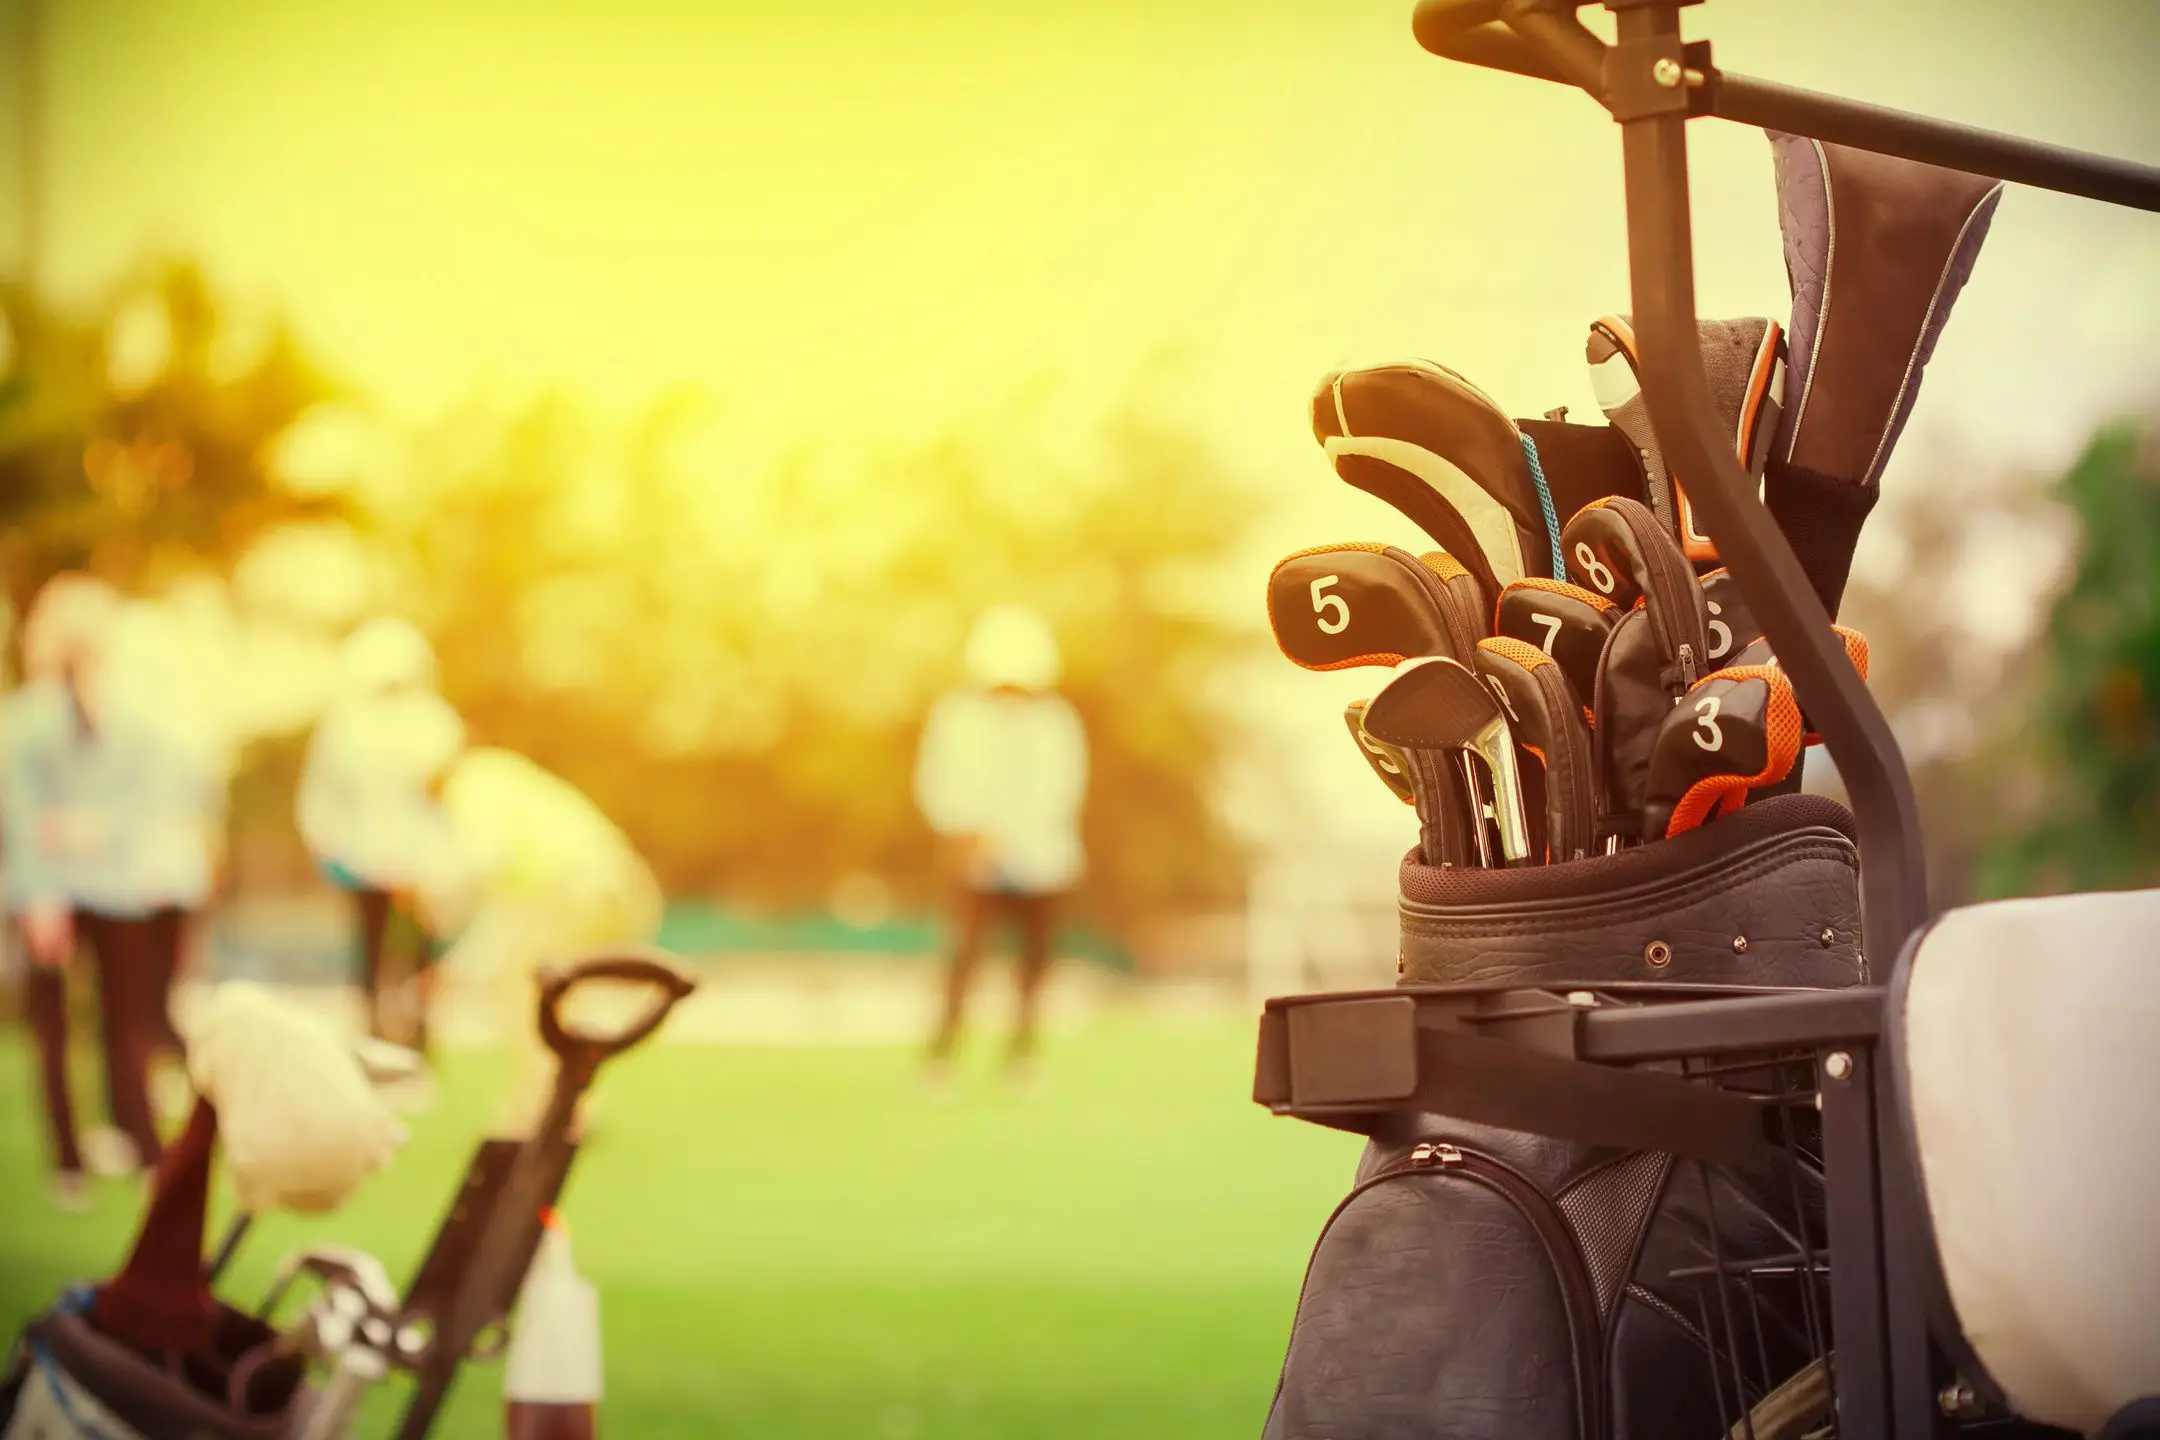 Walk / Push Cart or Power Cart: How do you golf? What’s best for you?